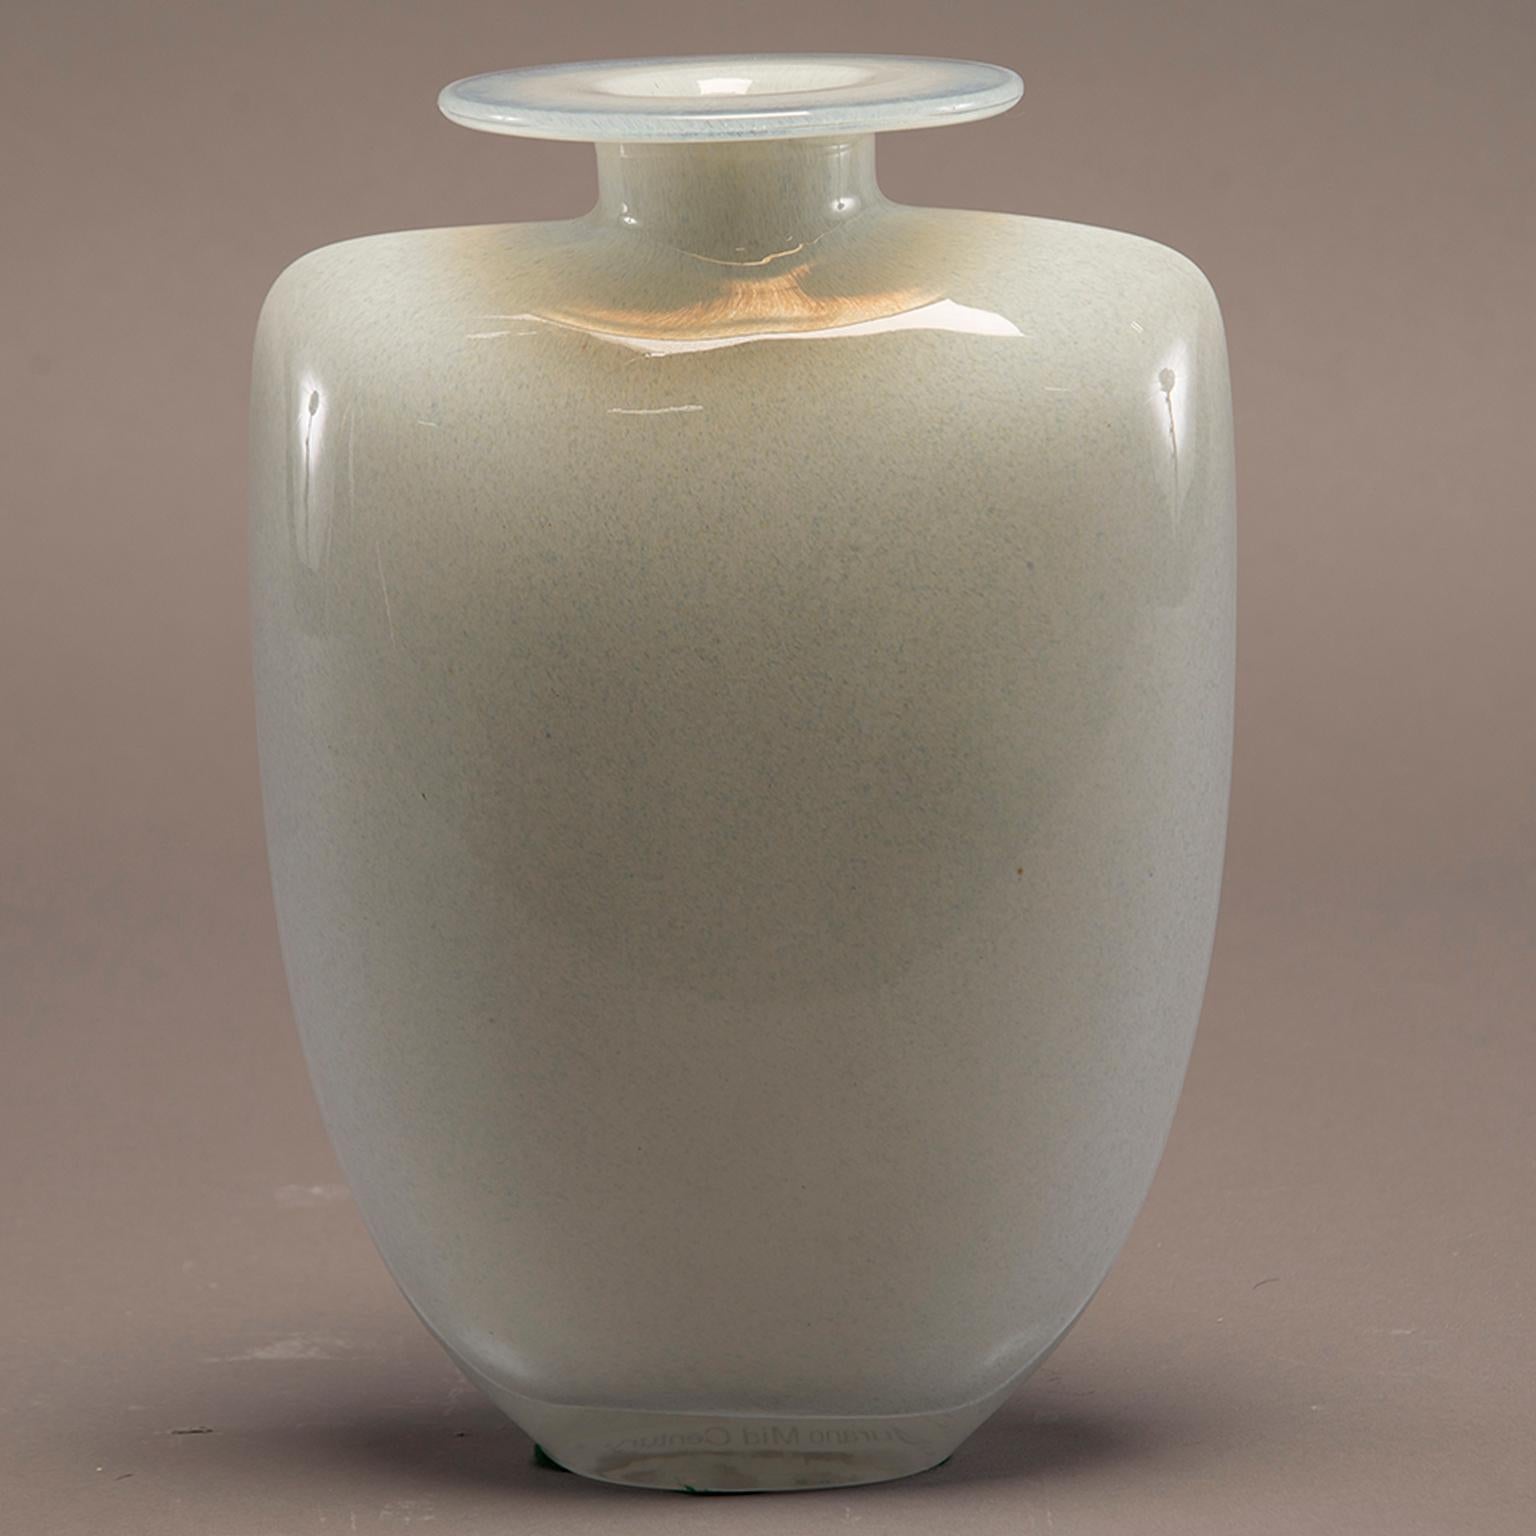 White art glass vase with modern, sleek form, circa 1960s. Base of vessel has wide shoulders, short neck and wide, flat rim. Believed to be Murano manufacturer. No makers mark found.